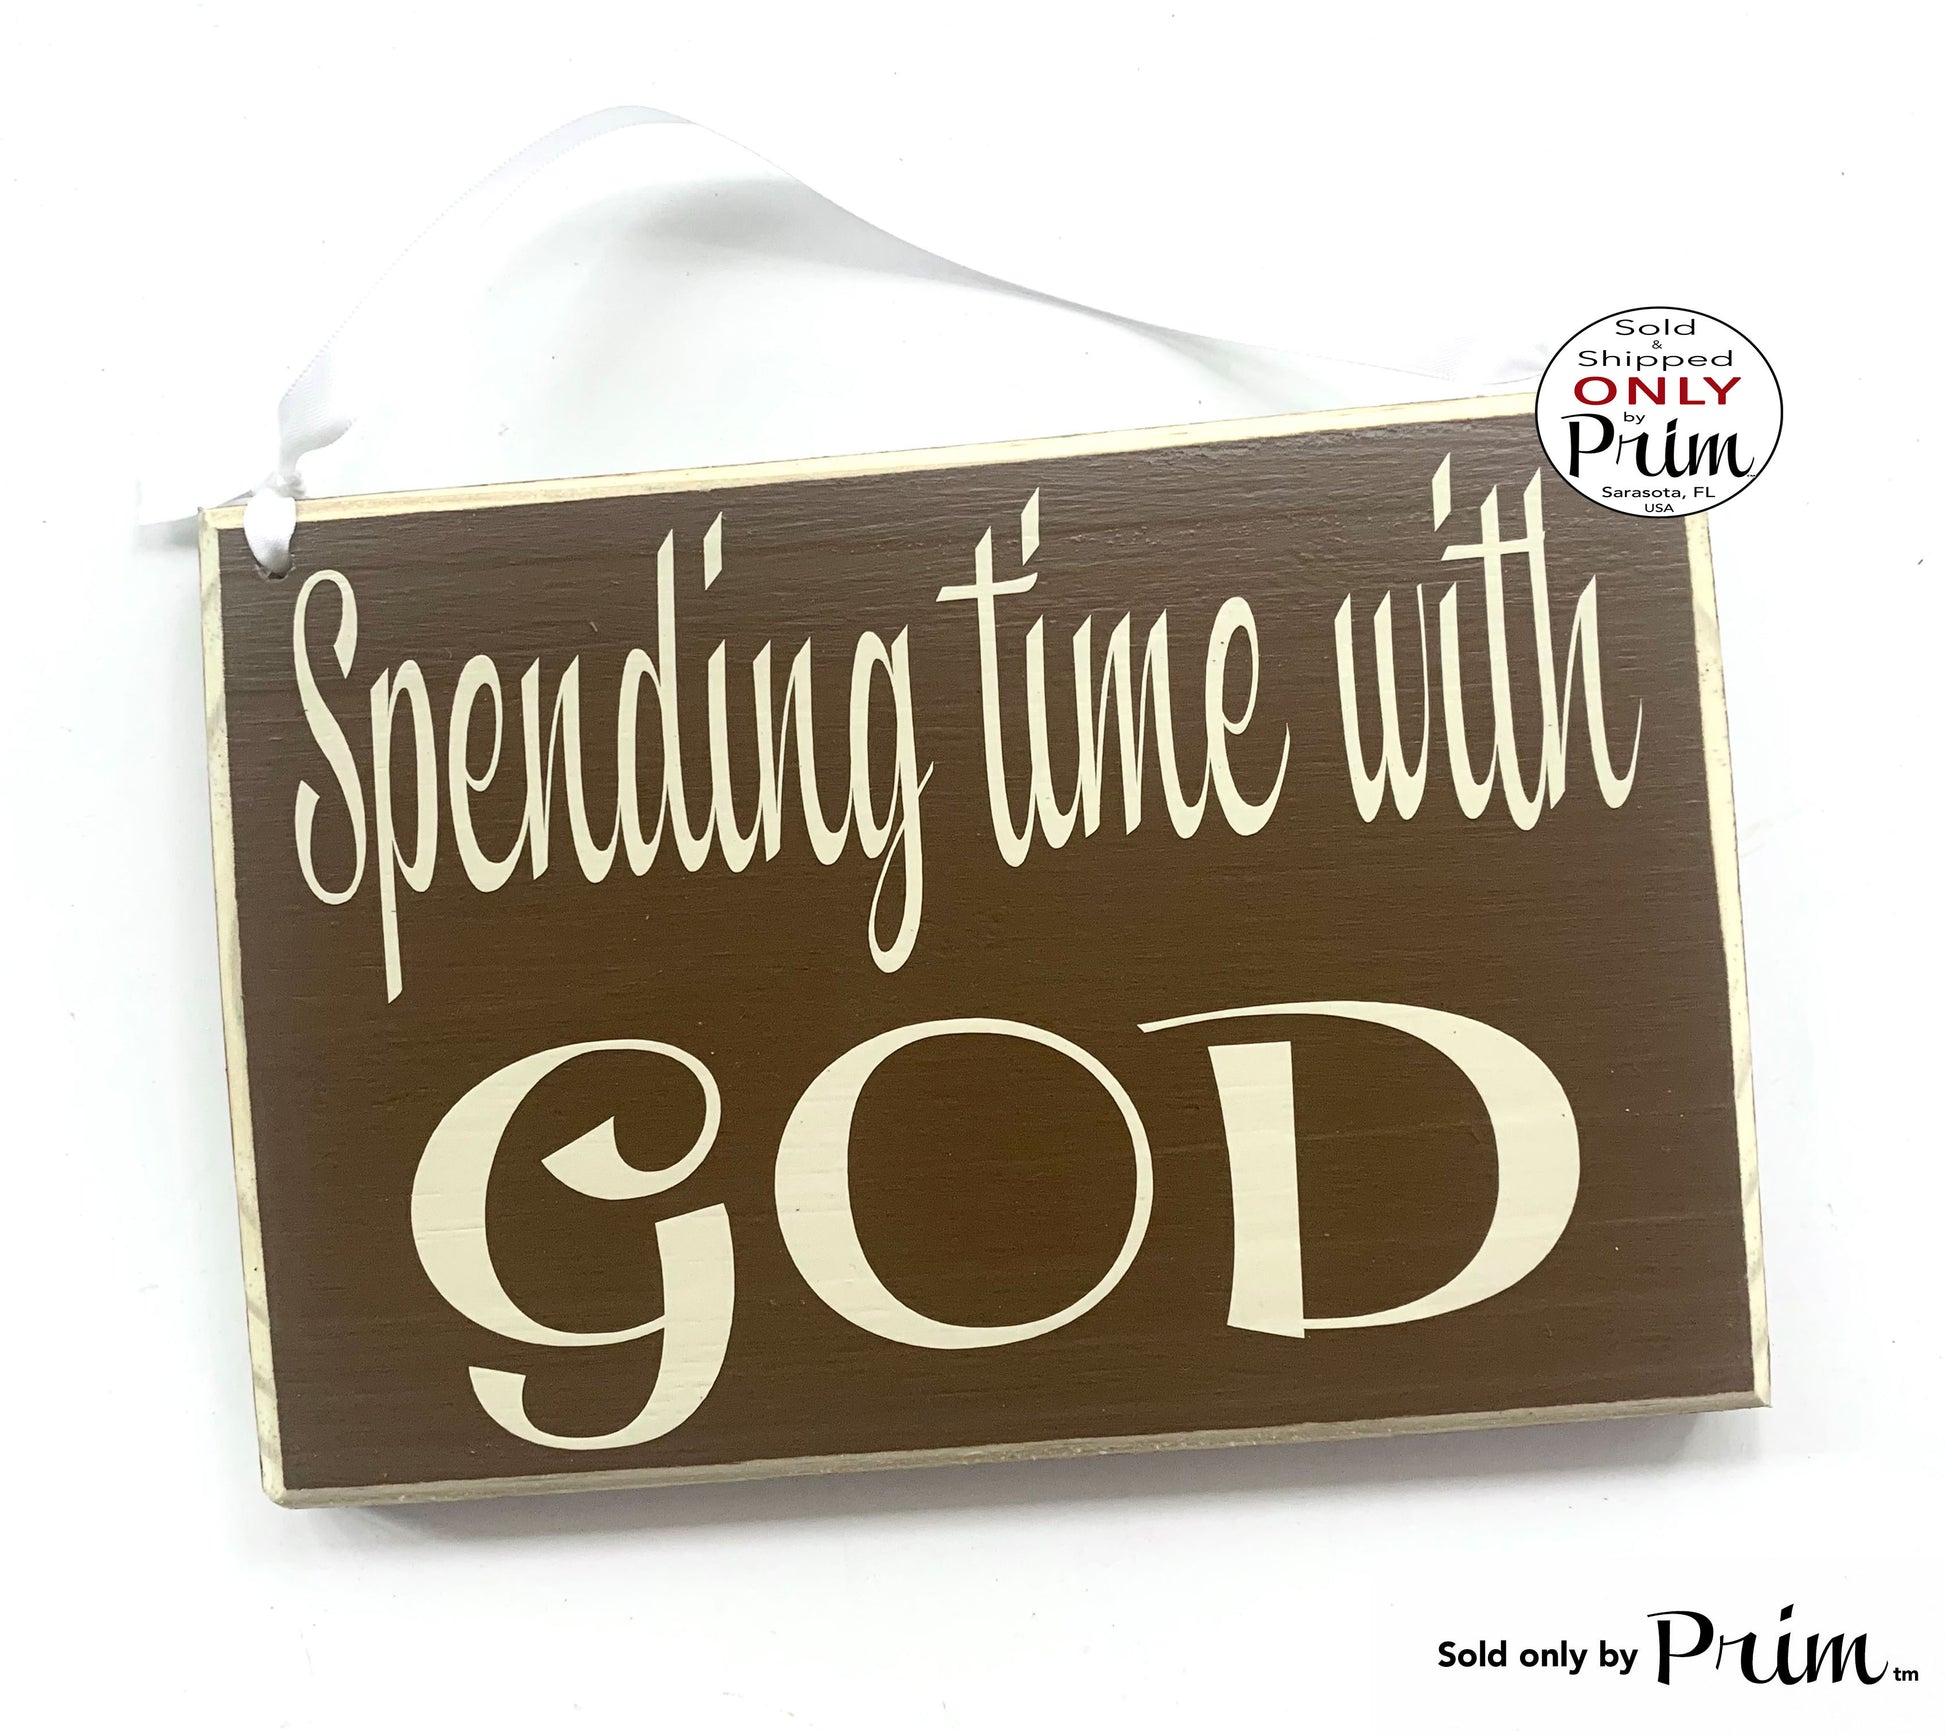 8x6 Spending Time With God Custom Wood Sign Please Do Not Disturb Quiet Prayer In Session Religious Progress Do Not Enter Wall Door Plaque Designs by Prim 